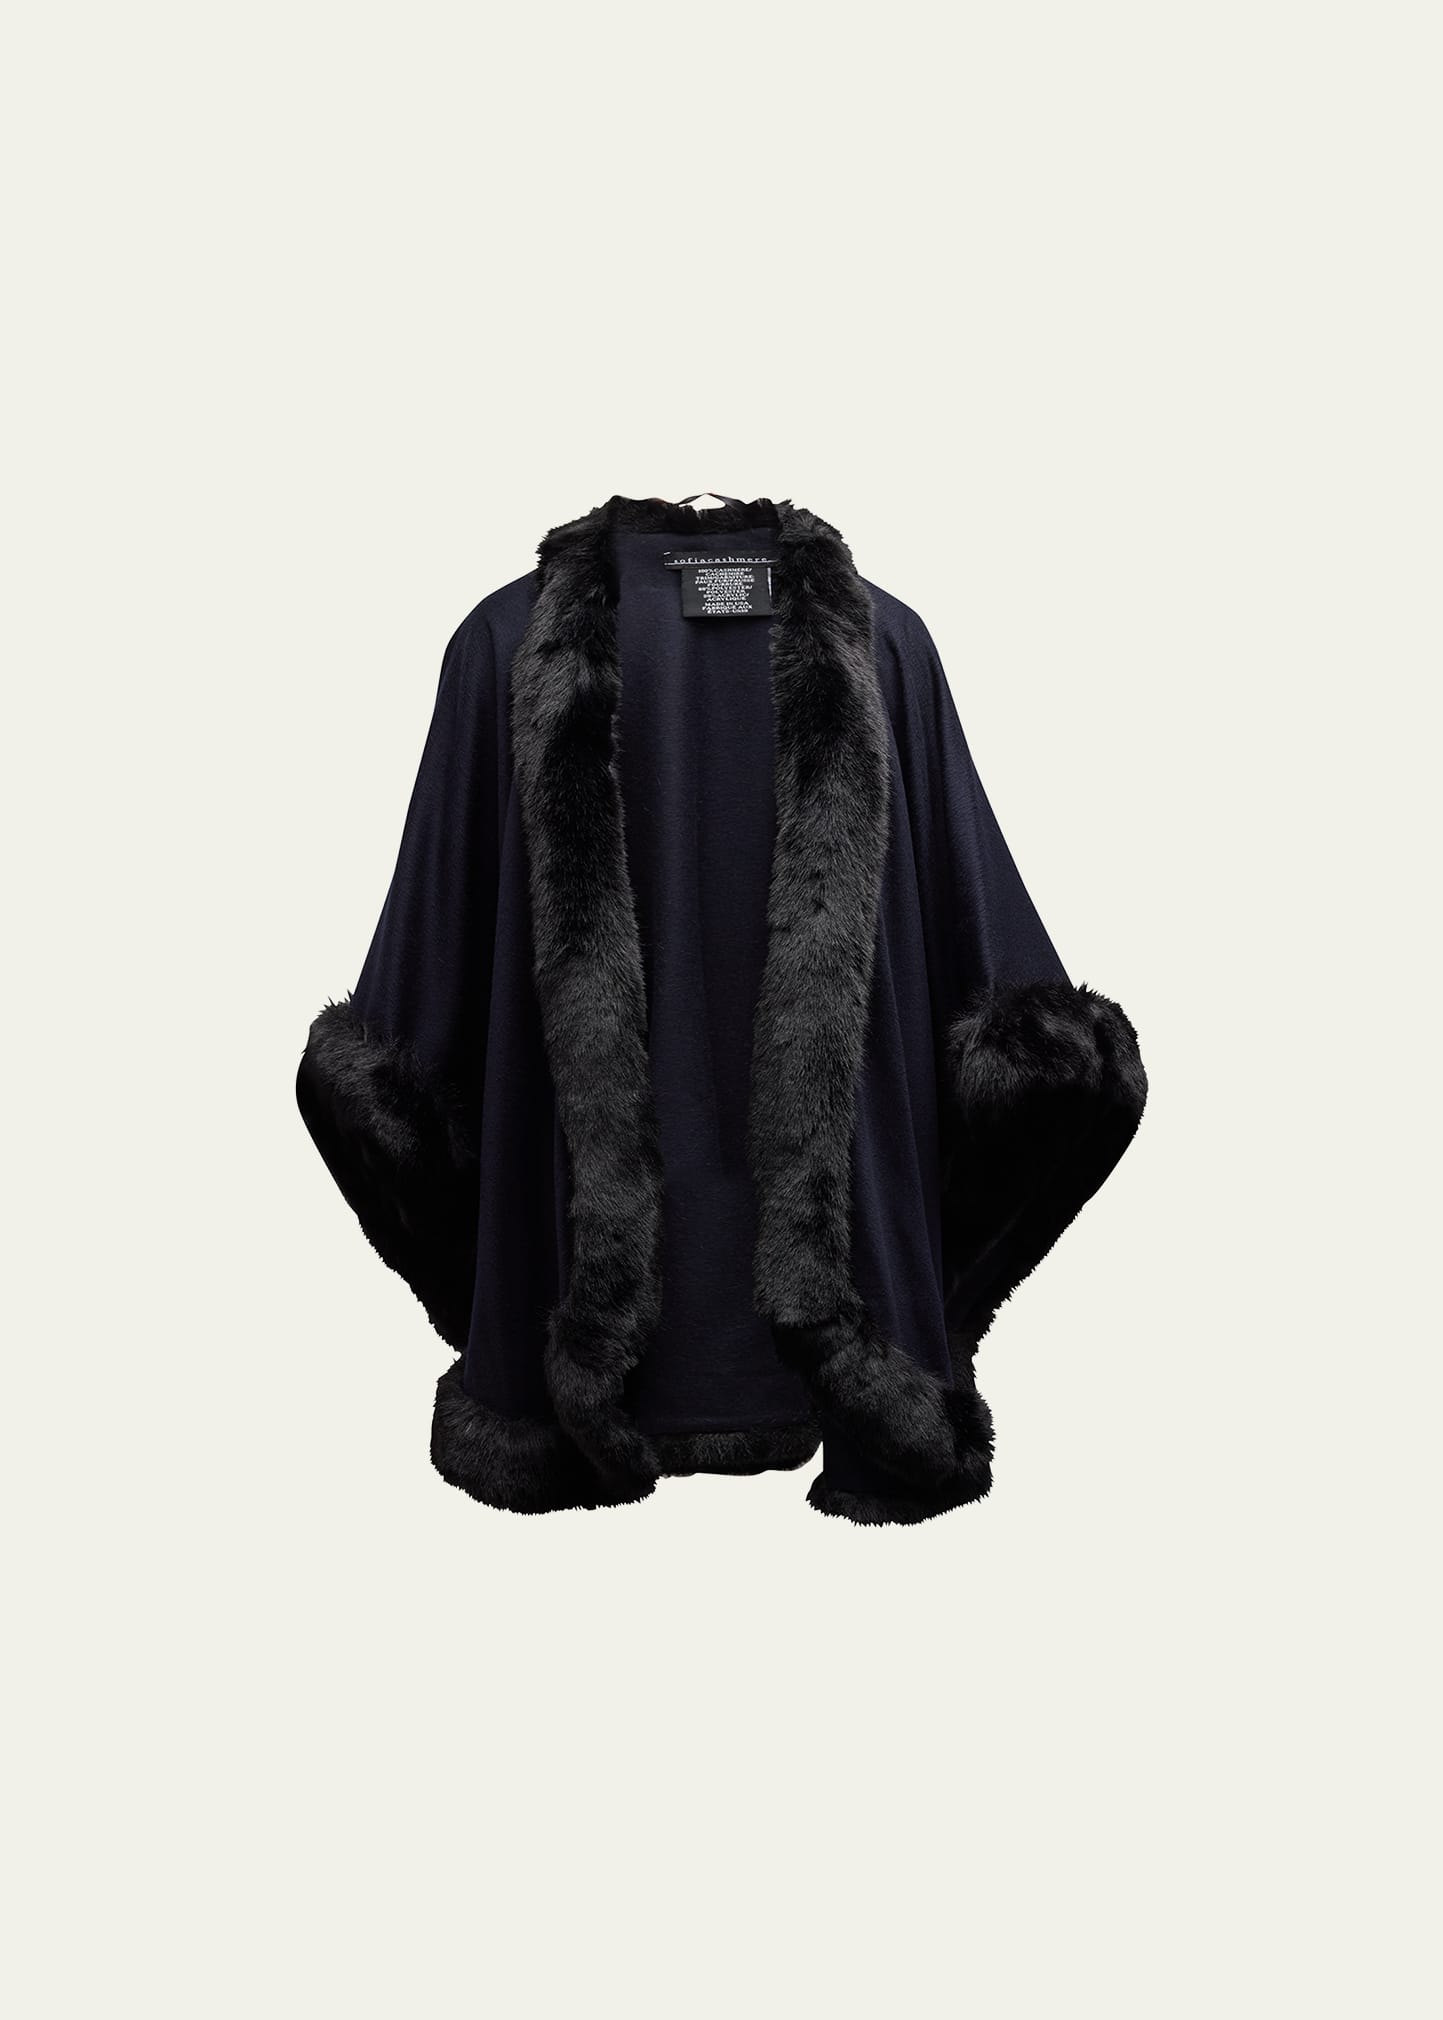 Sofia Cashmere Cashmere Cape With Faux Fur Trim In Navy With Black F